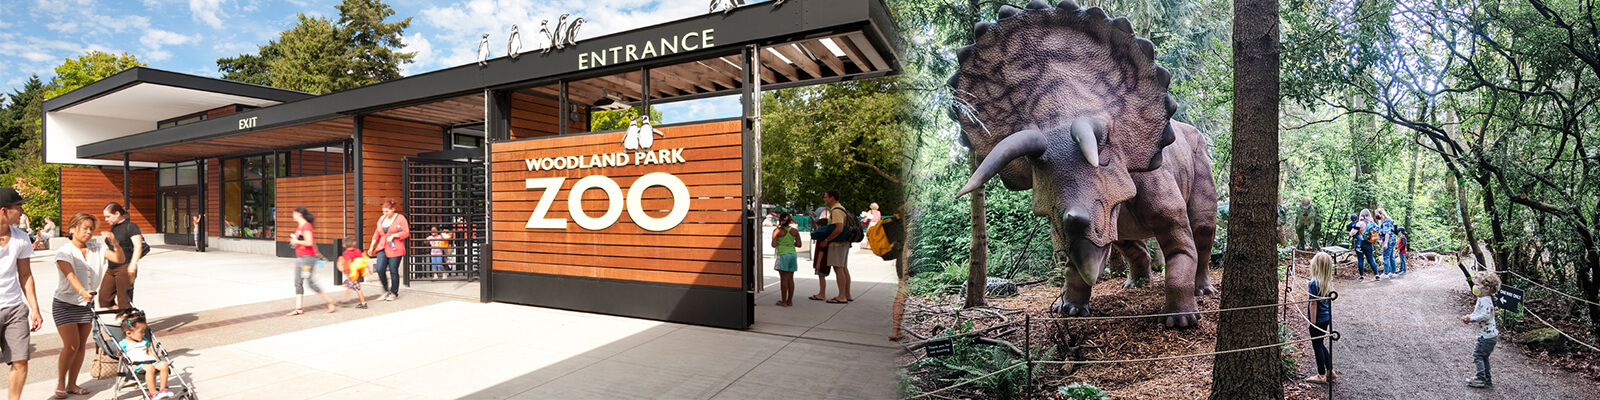 Woodland Park Zoo Coupons